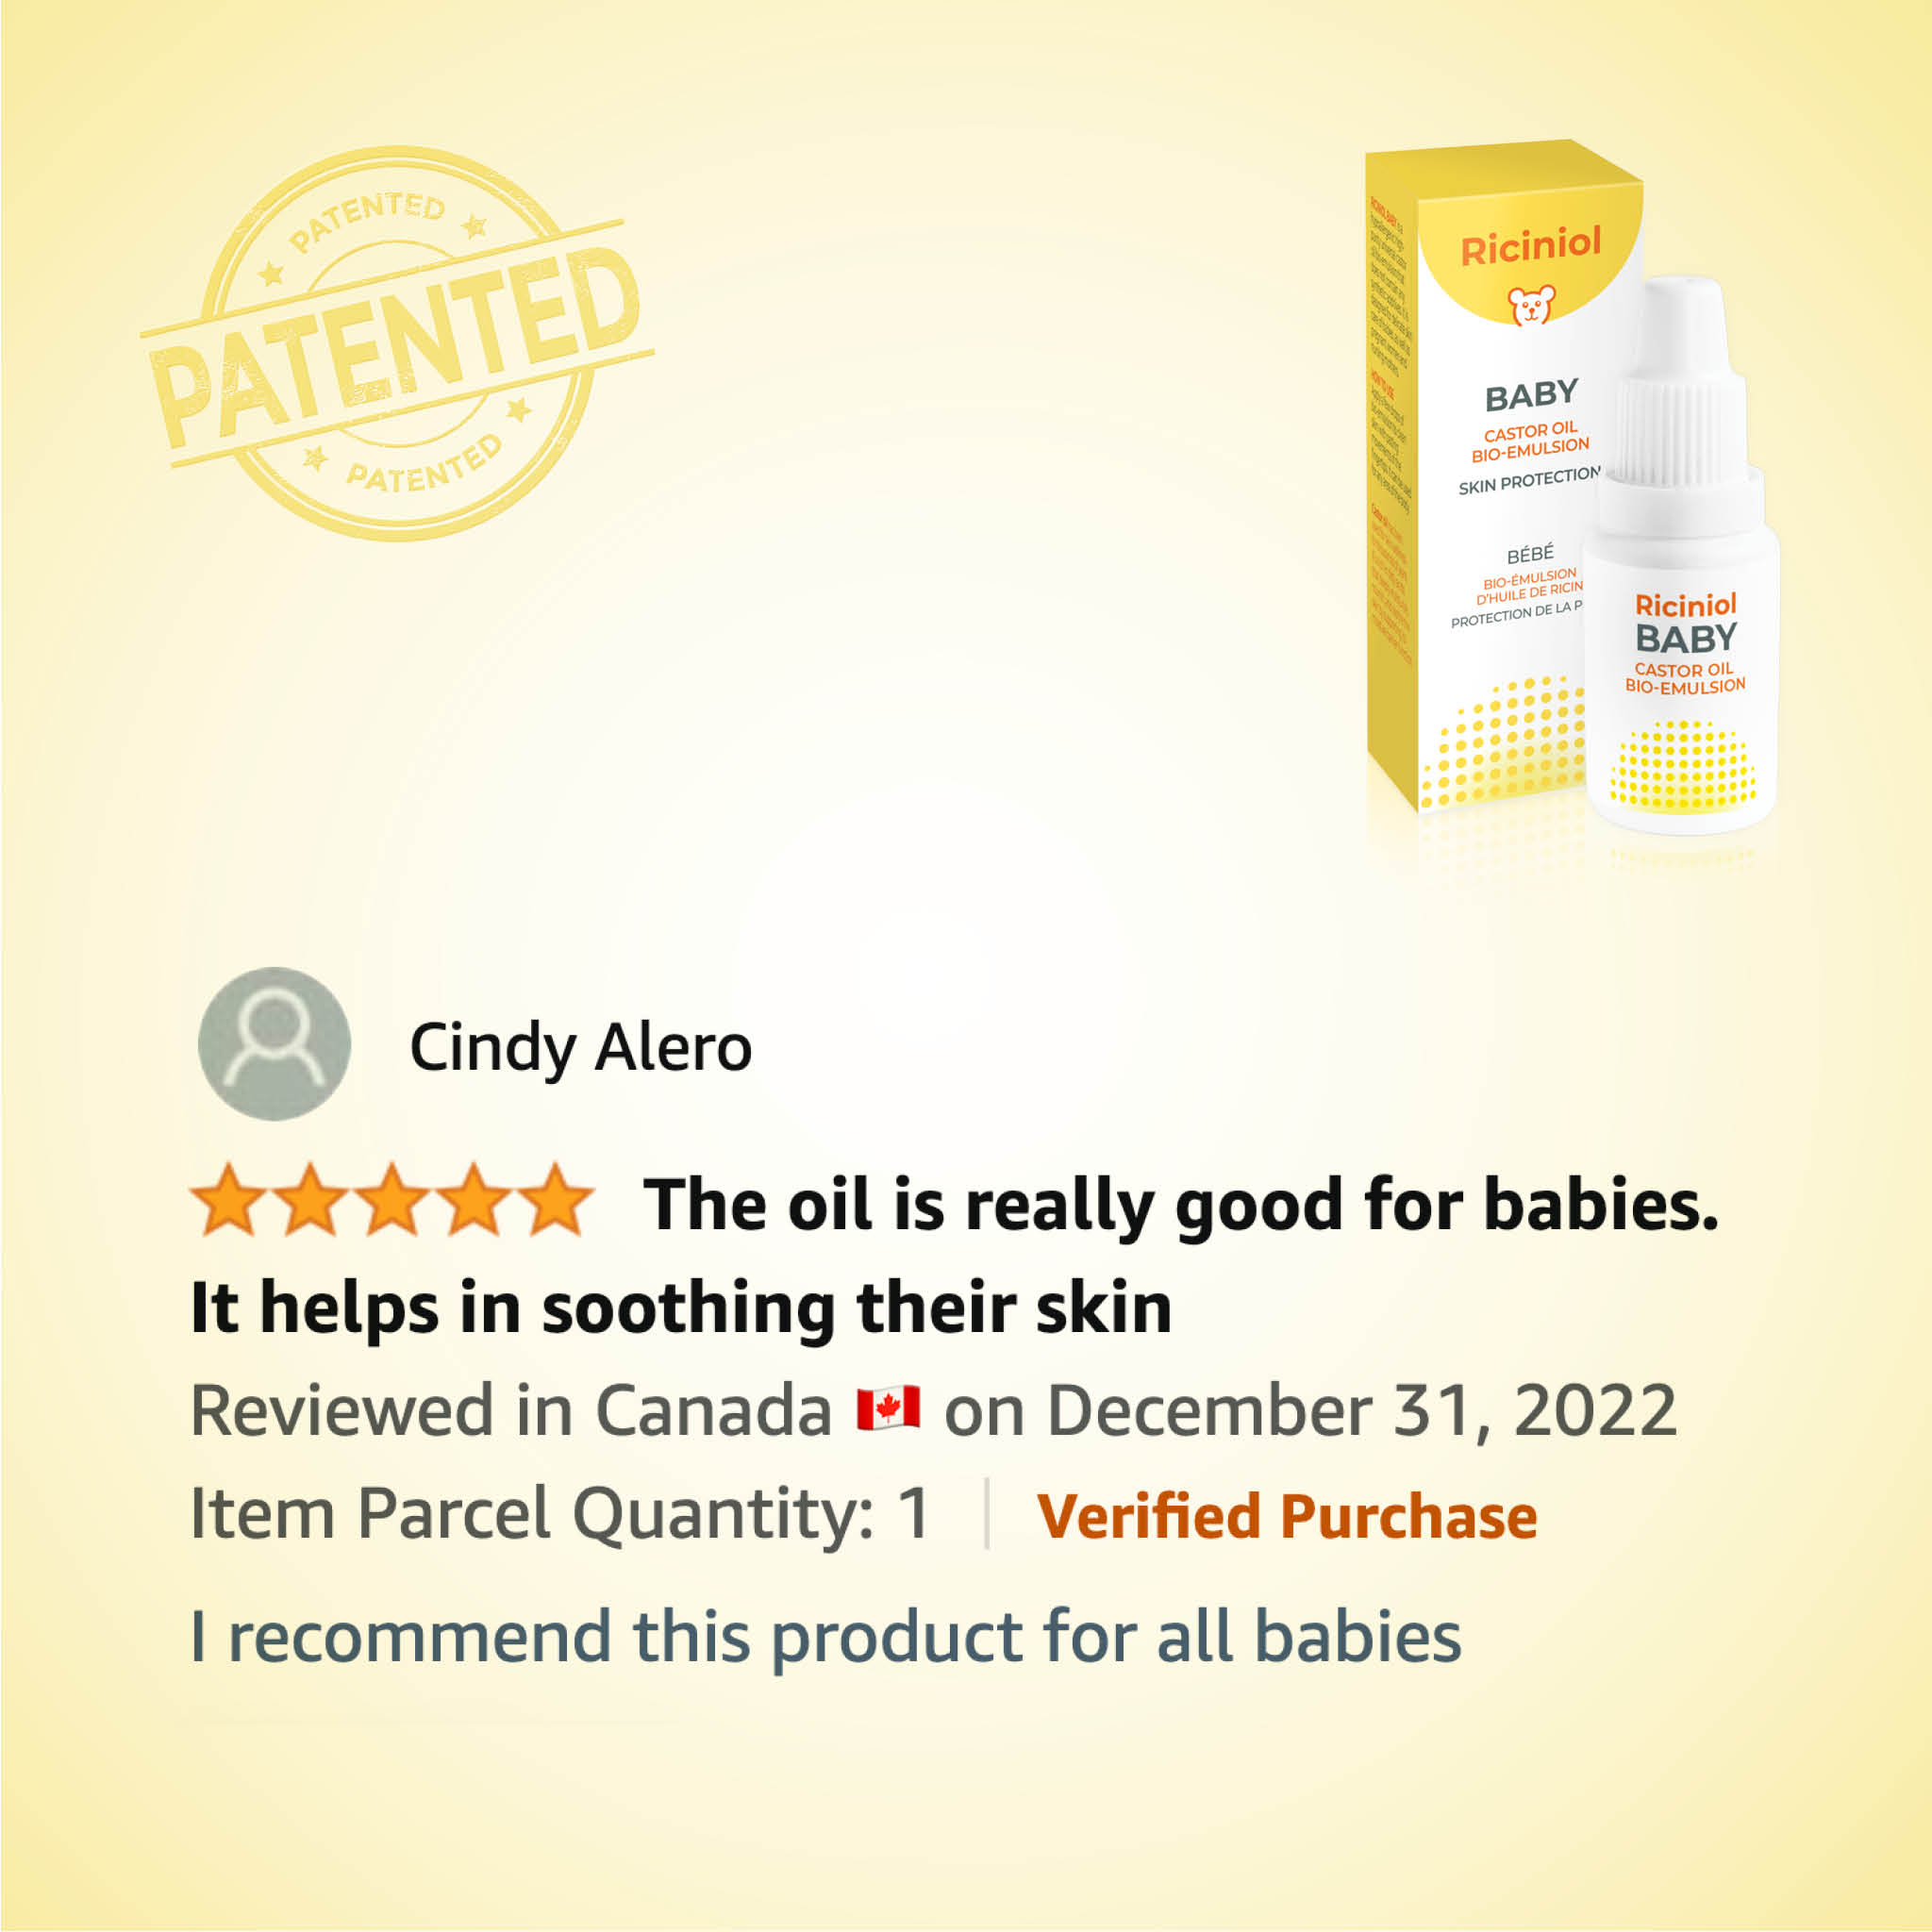 Riciniol Baby The oil is really good for babies. It helps in soothing their skin I recommend this product for all babies